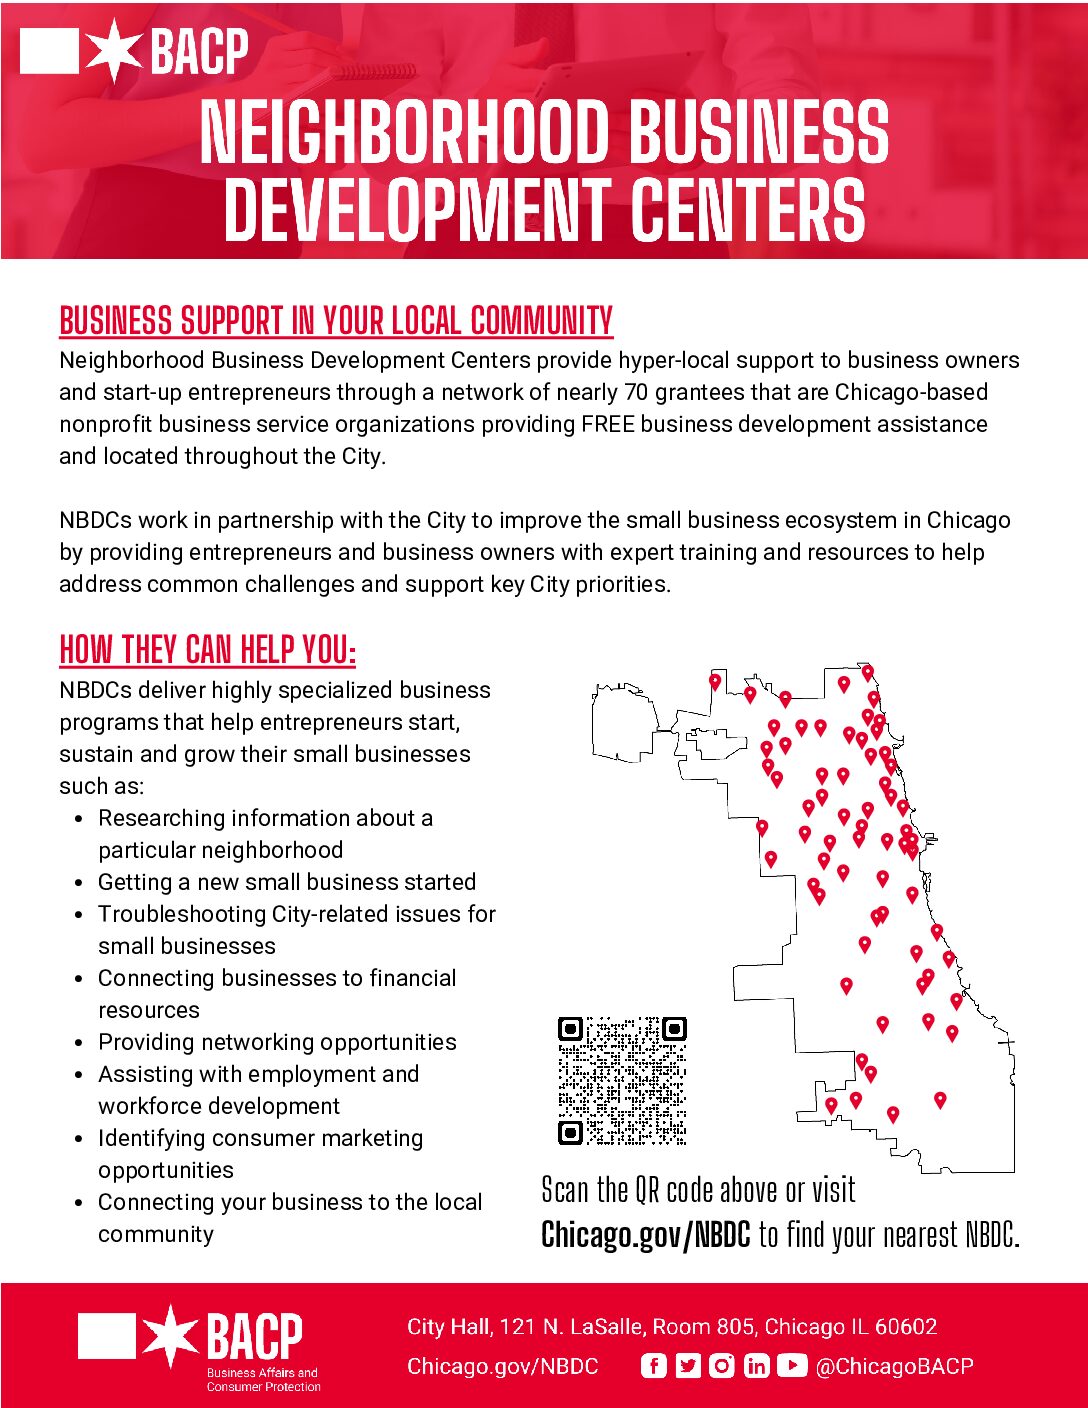 Neighborhood Business Development Centers awarded Funds to Assist Small Businesses